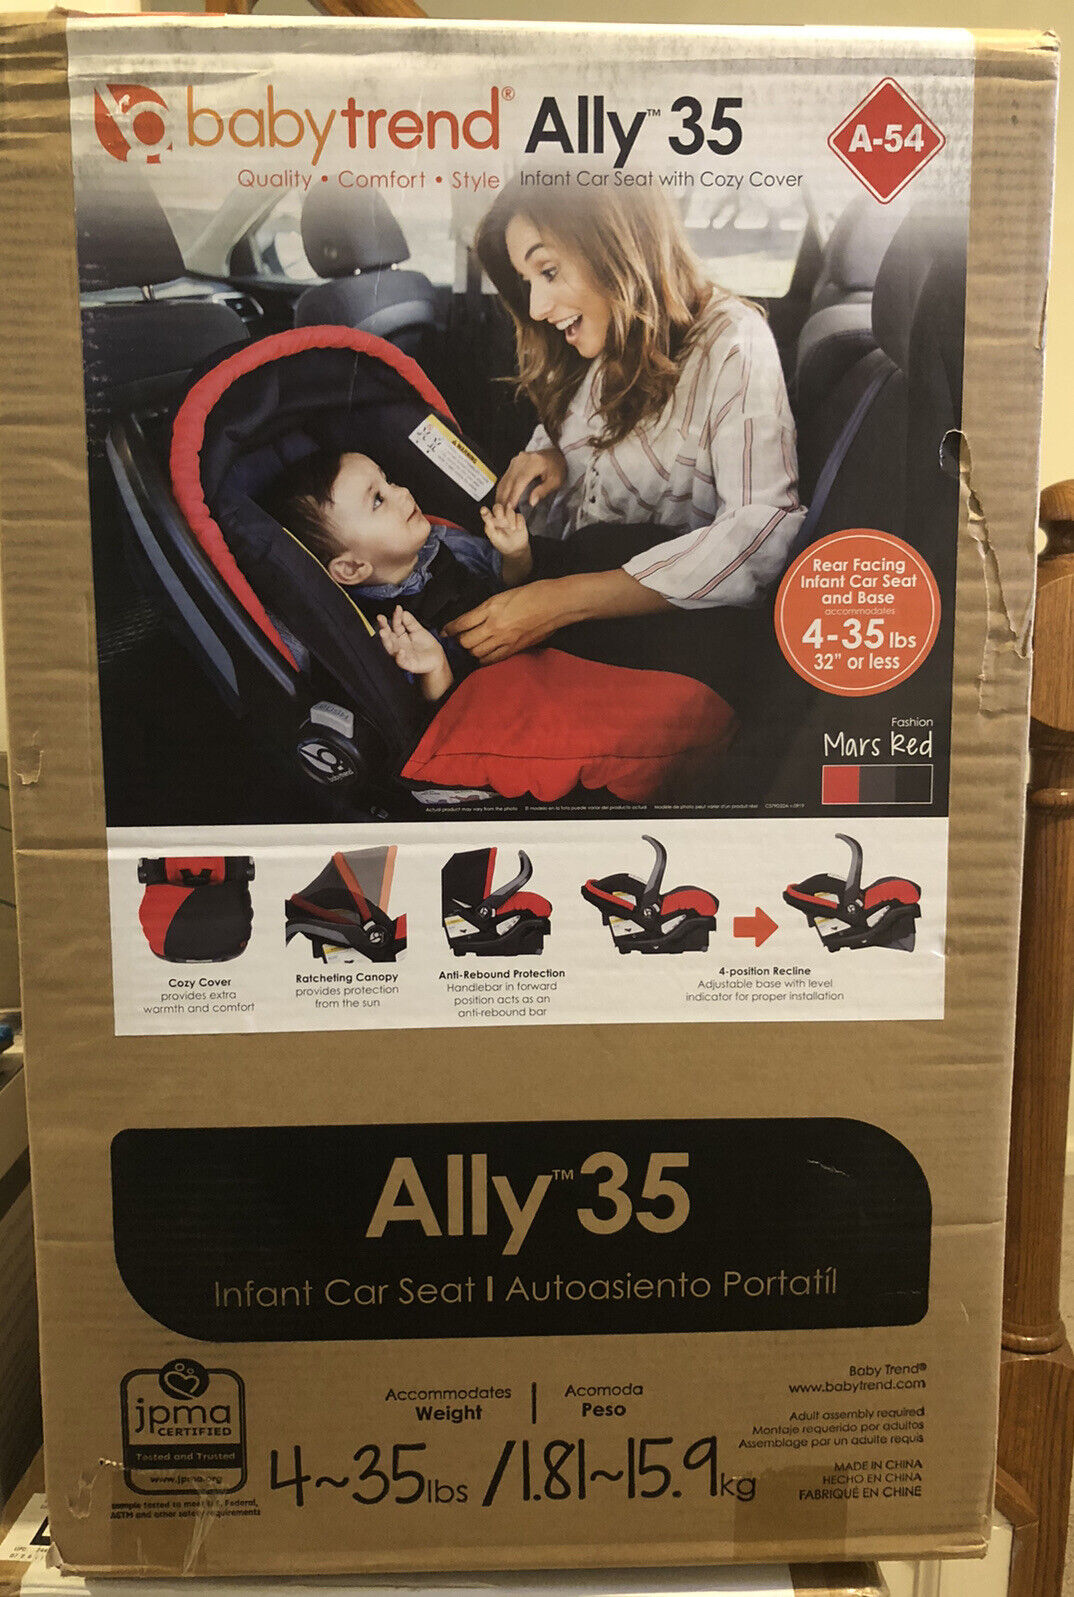 Baby Trend Ally 35 Rear Facing Infant Car Seat With Base And Cozy Cover, Blk/red